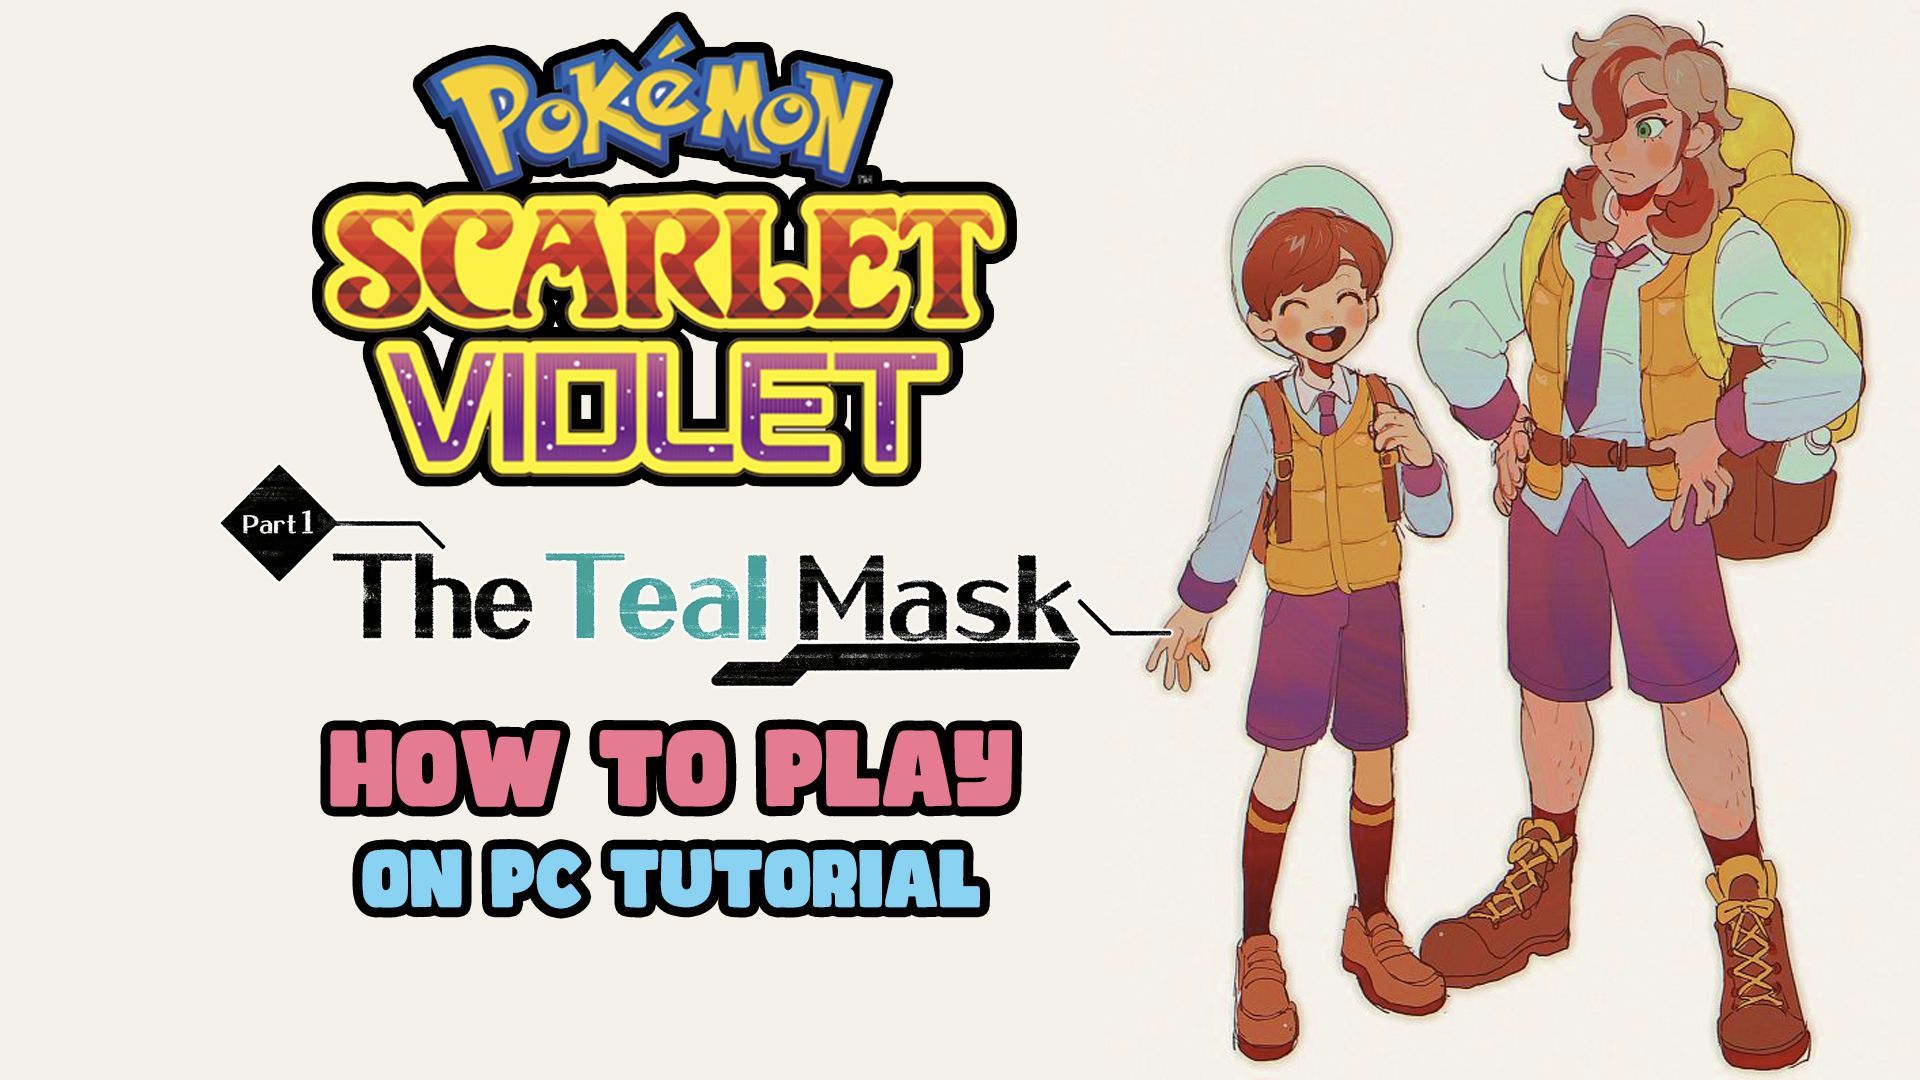 Pokemon Scarlet & Violet: How to play on PC?